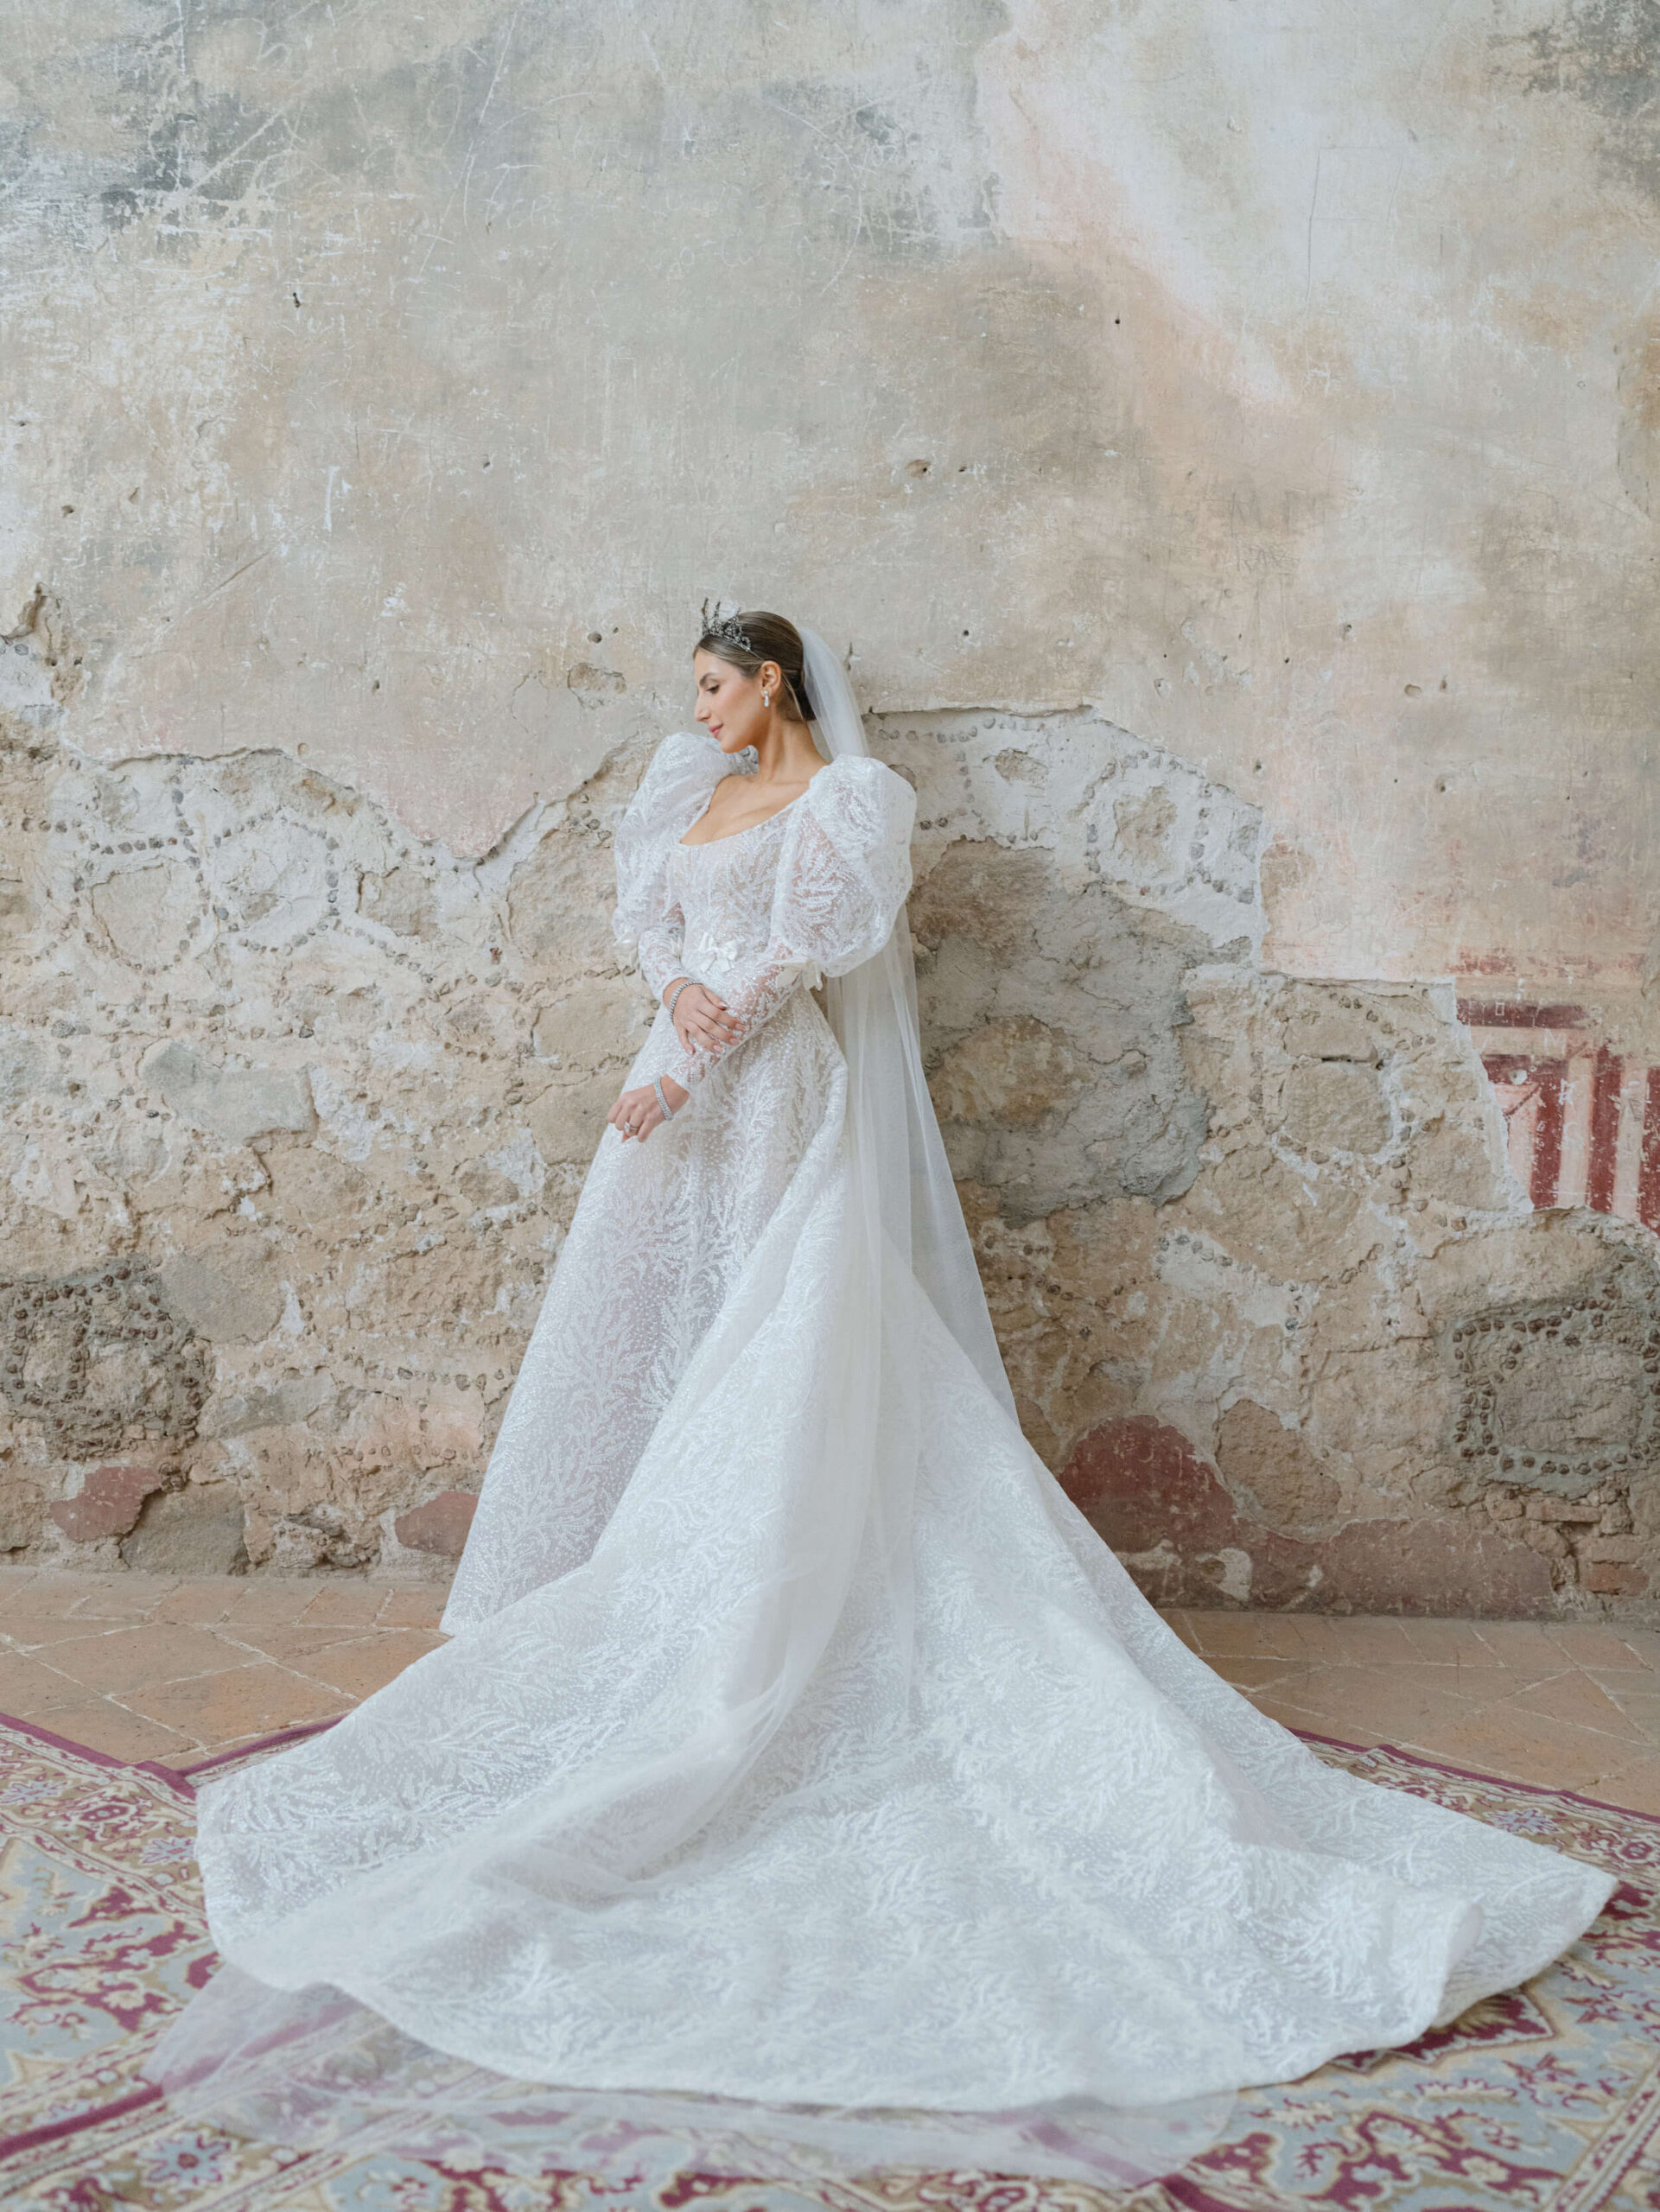 Ashley posing in her Reem Acra wedding gown in a room with crumbling walls and oriental rugs